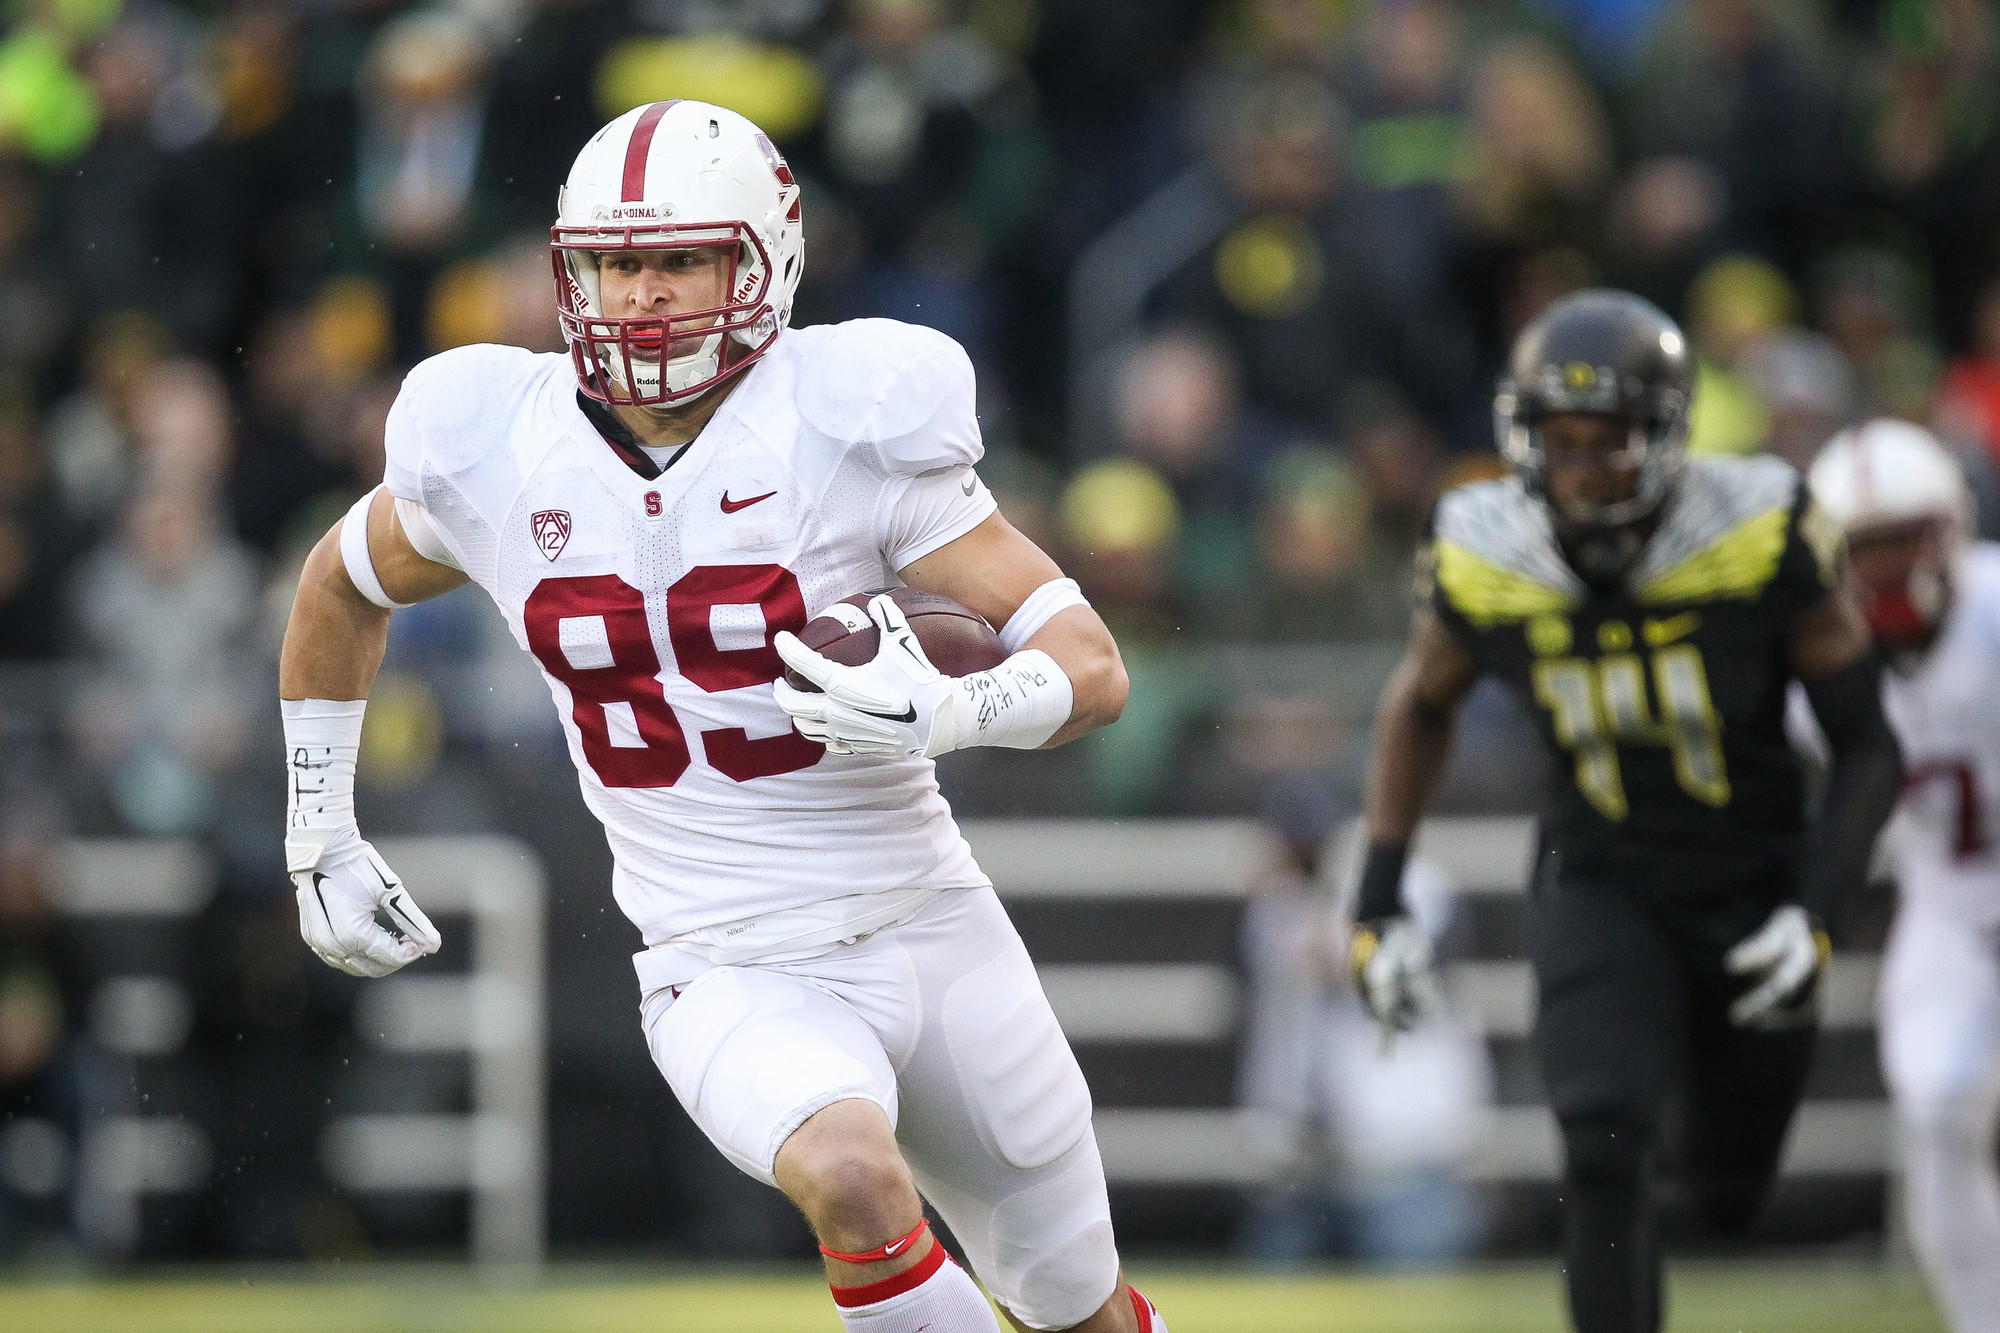 Seaford’s Devon Cajuste is hoping to make the San Francisco 49ers’ opening-day roster after playing for Stanford.